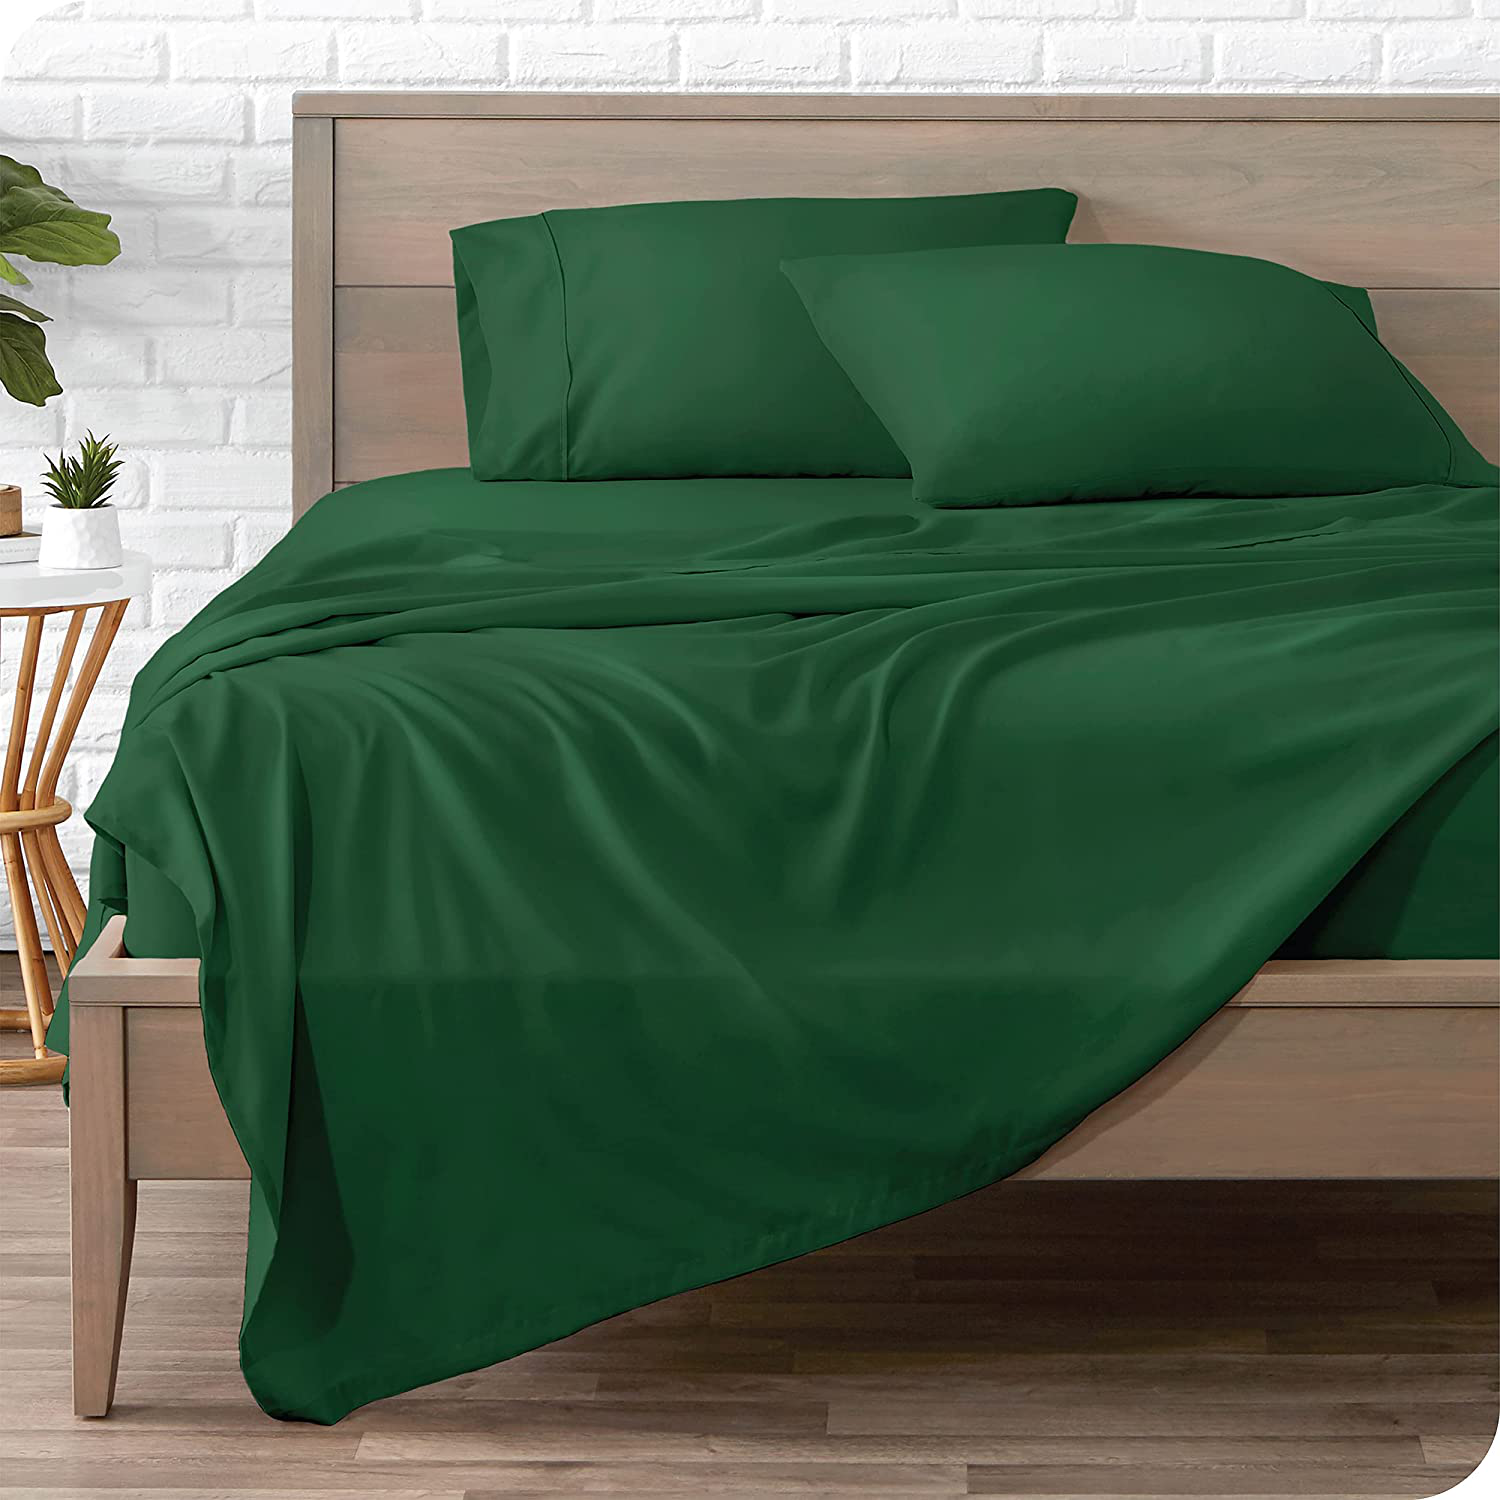 Bare Home Queen Sheet Set - 1800 Ultra-Soft Microfiber Queen Bed Sheets - Double Brushed - Queen Sheets Set - Deep Pocket - Bedding Sheets & Pillowcases (Queen, Forest Green)